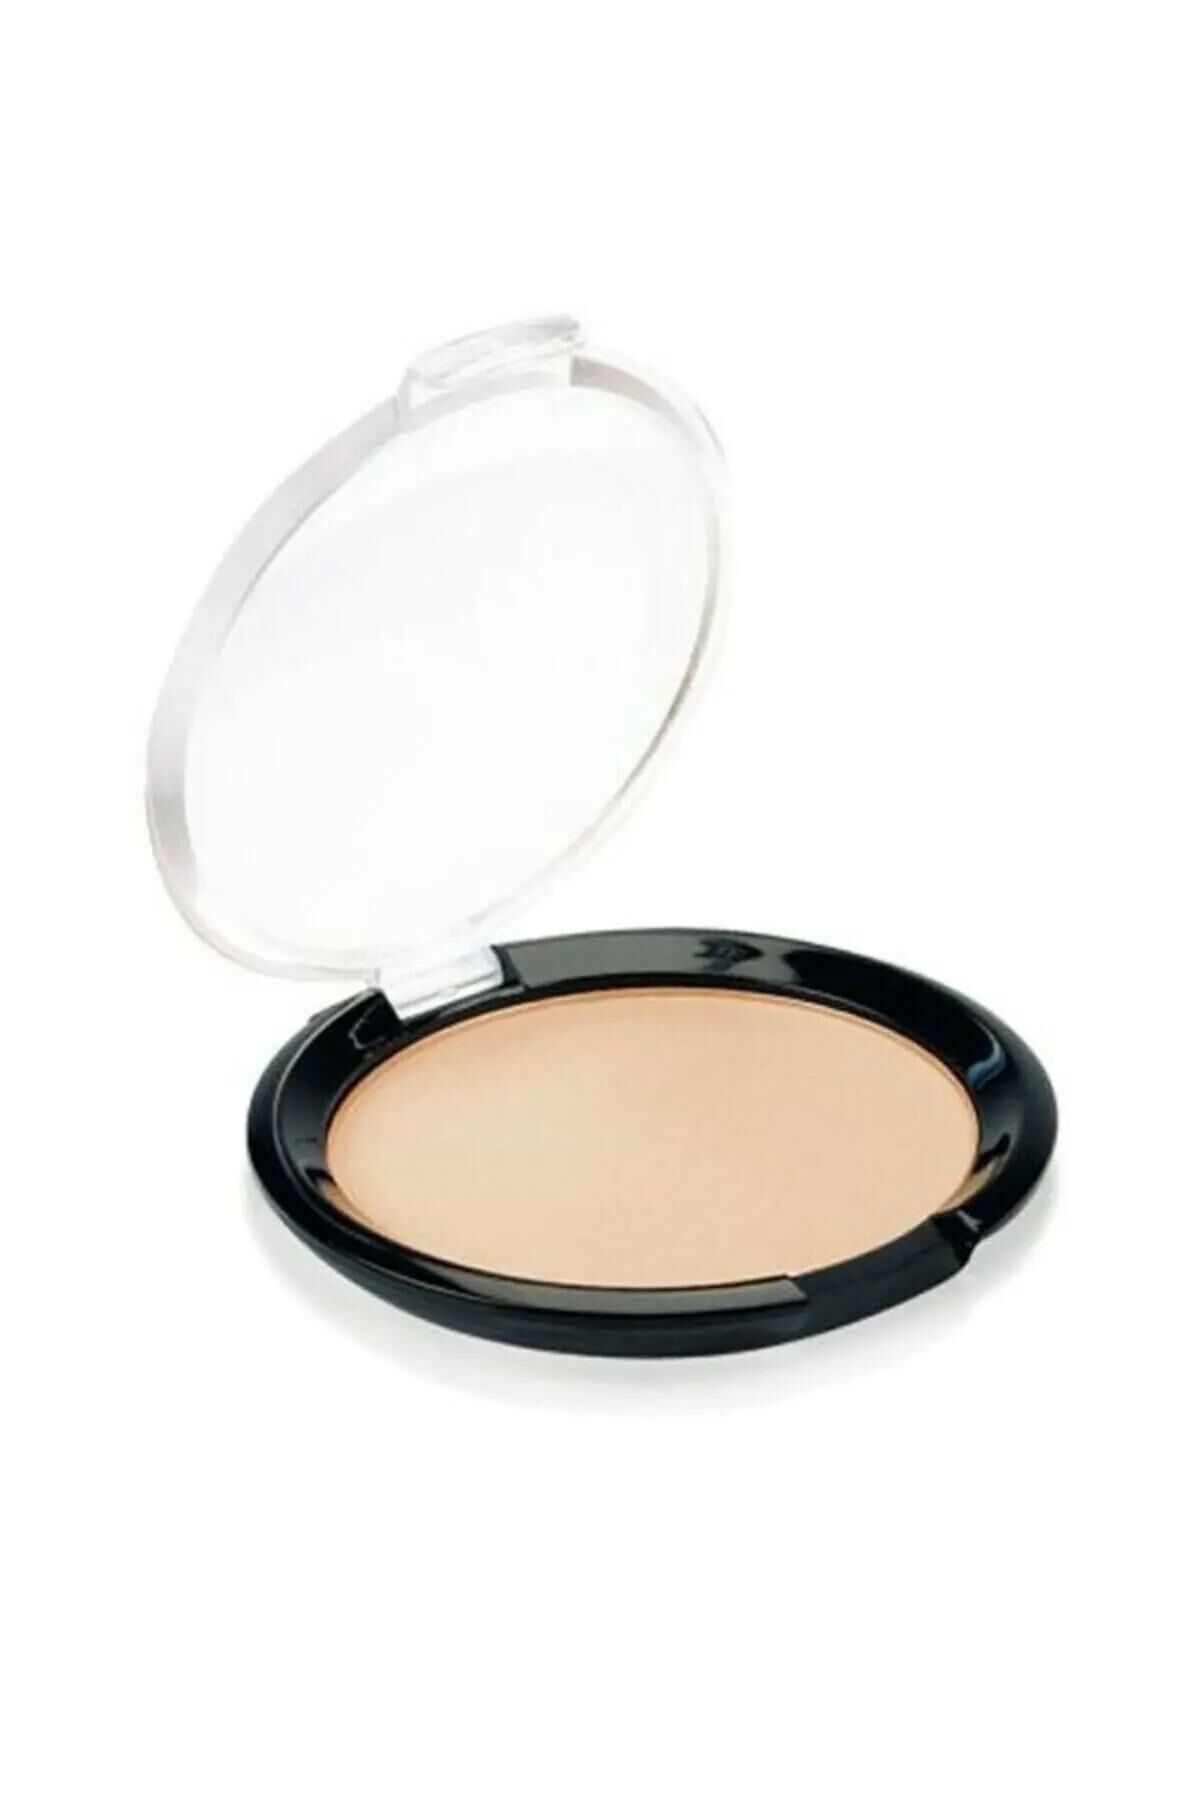 Golden Rose Silky Touch Compact Pudra No:05